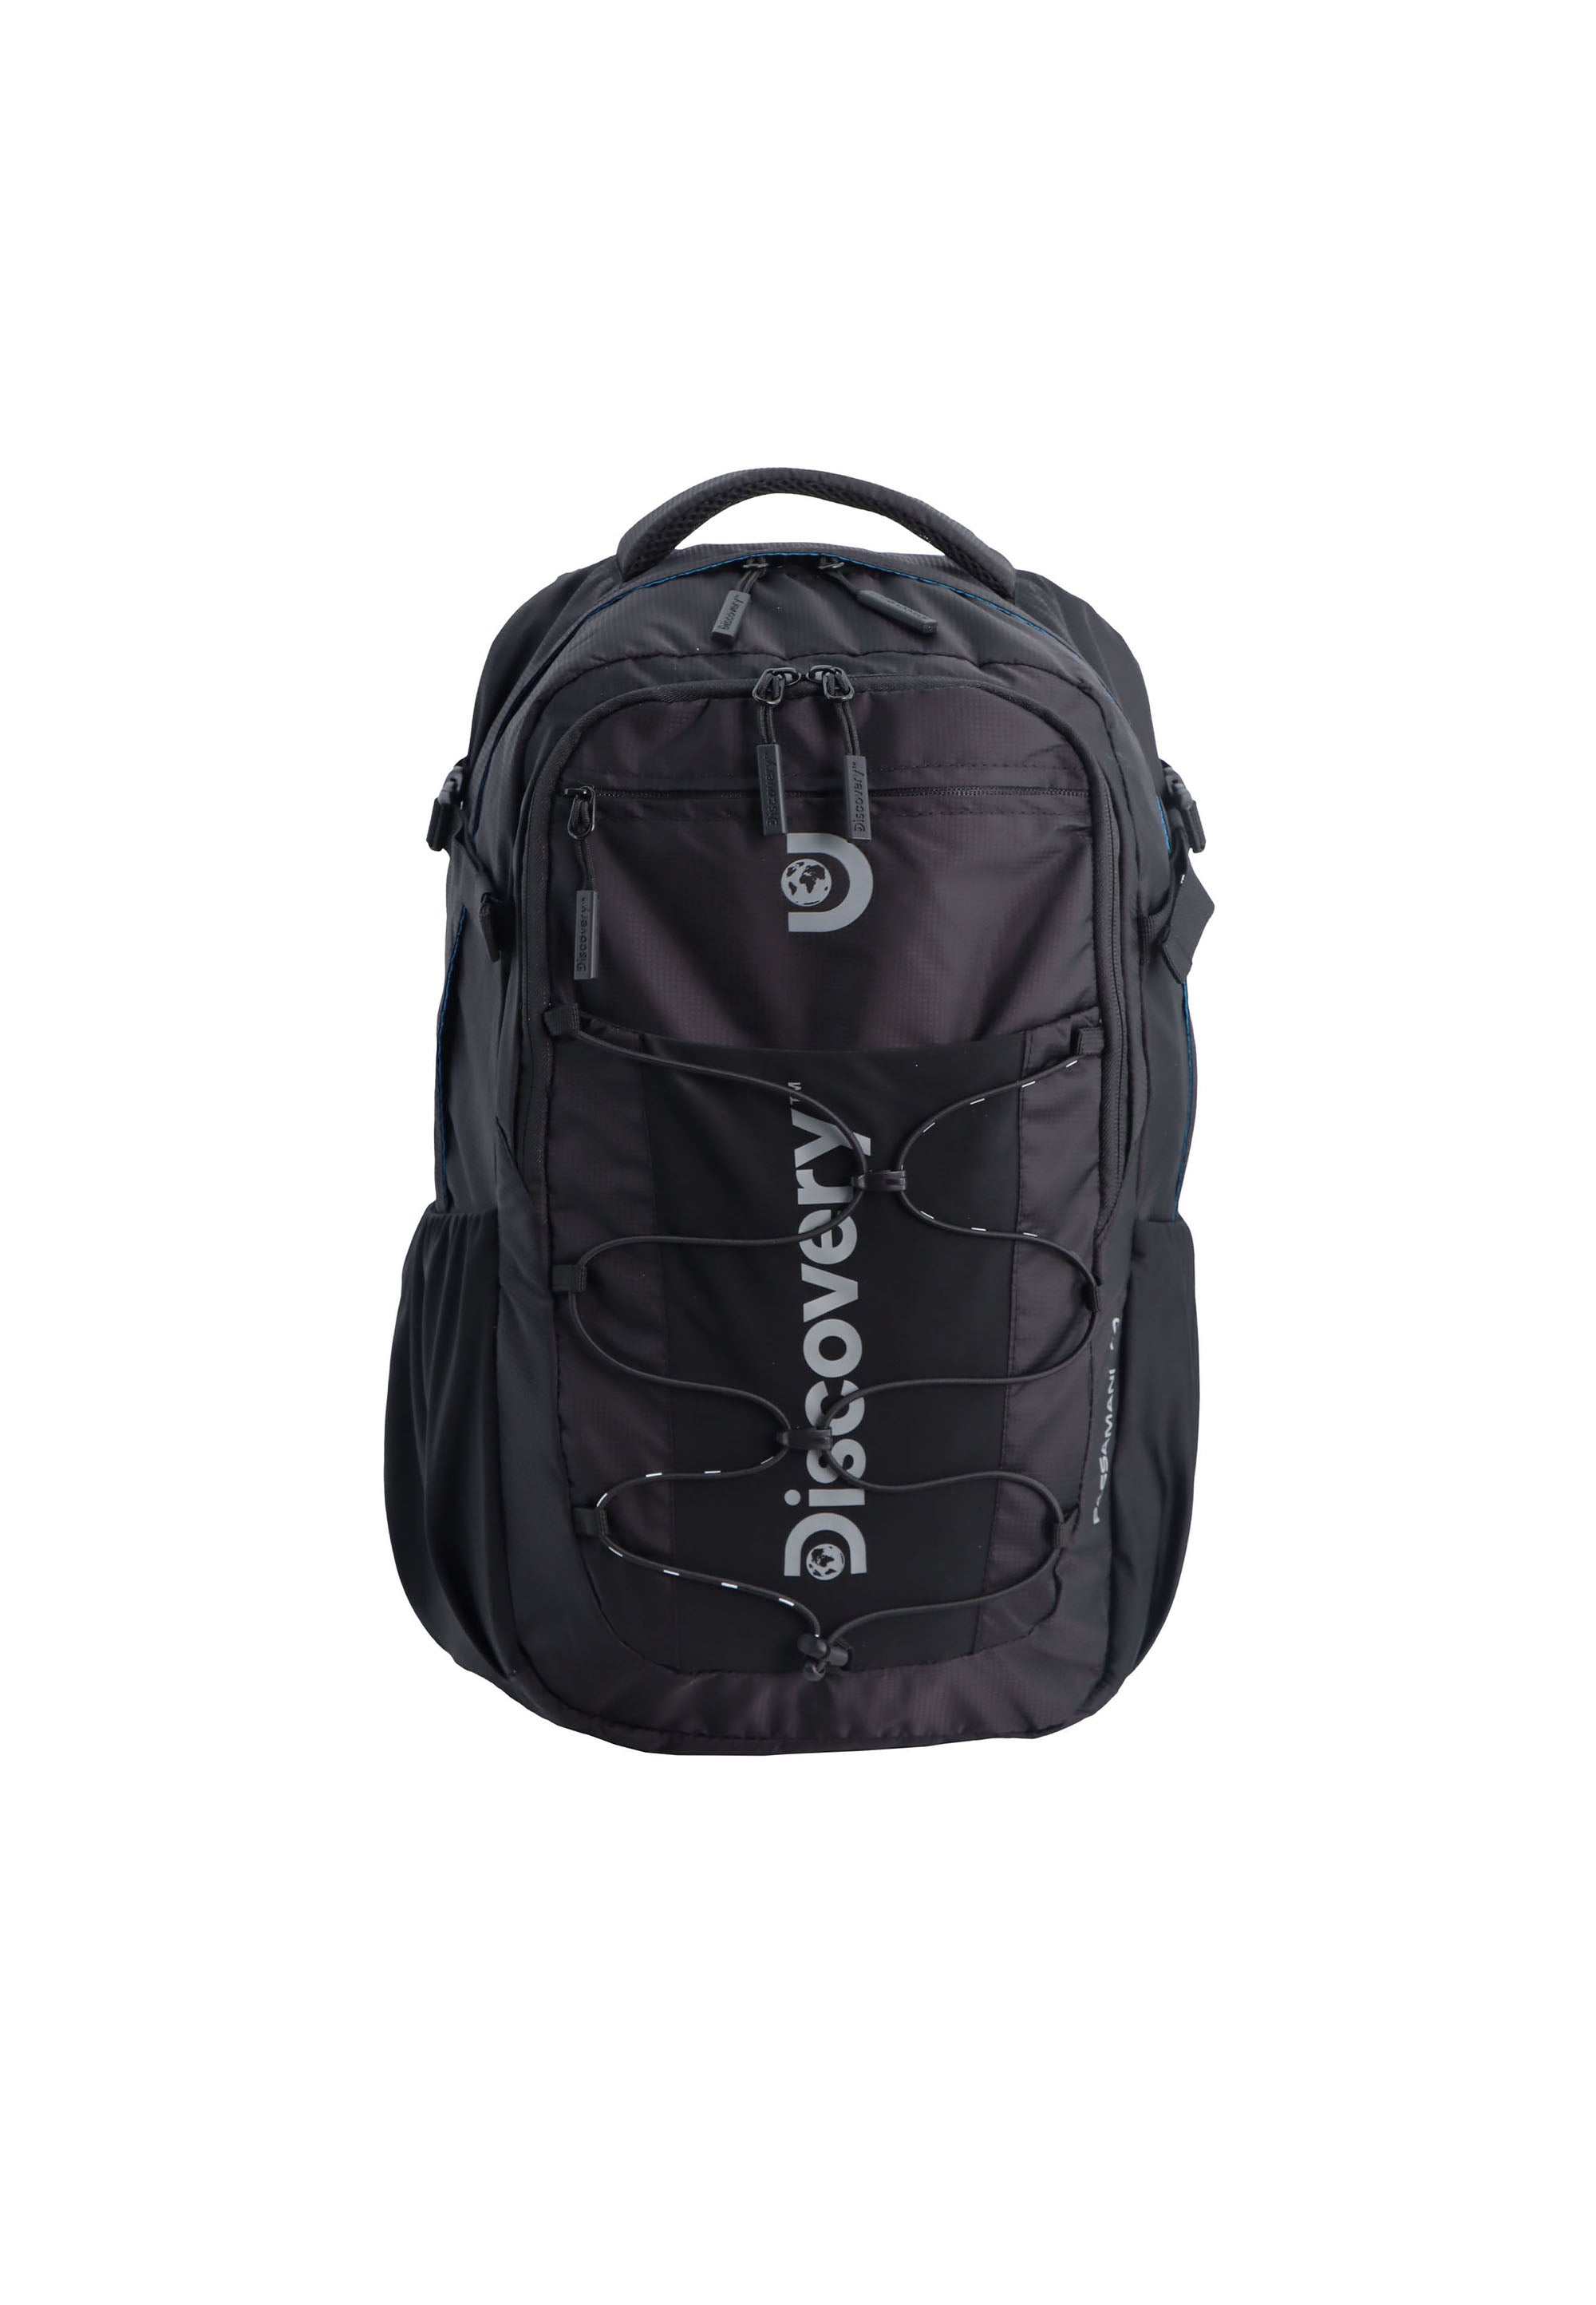 Discovery - Outdoor Rucksack - 30L